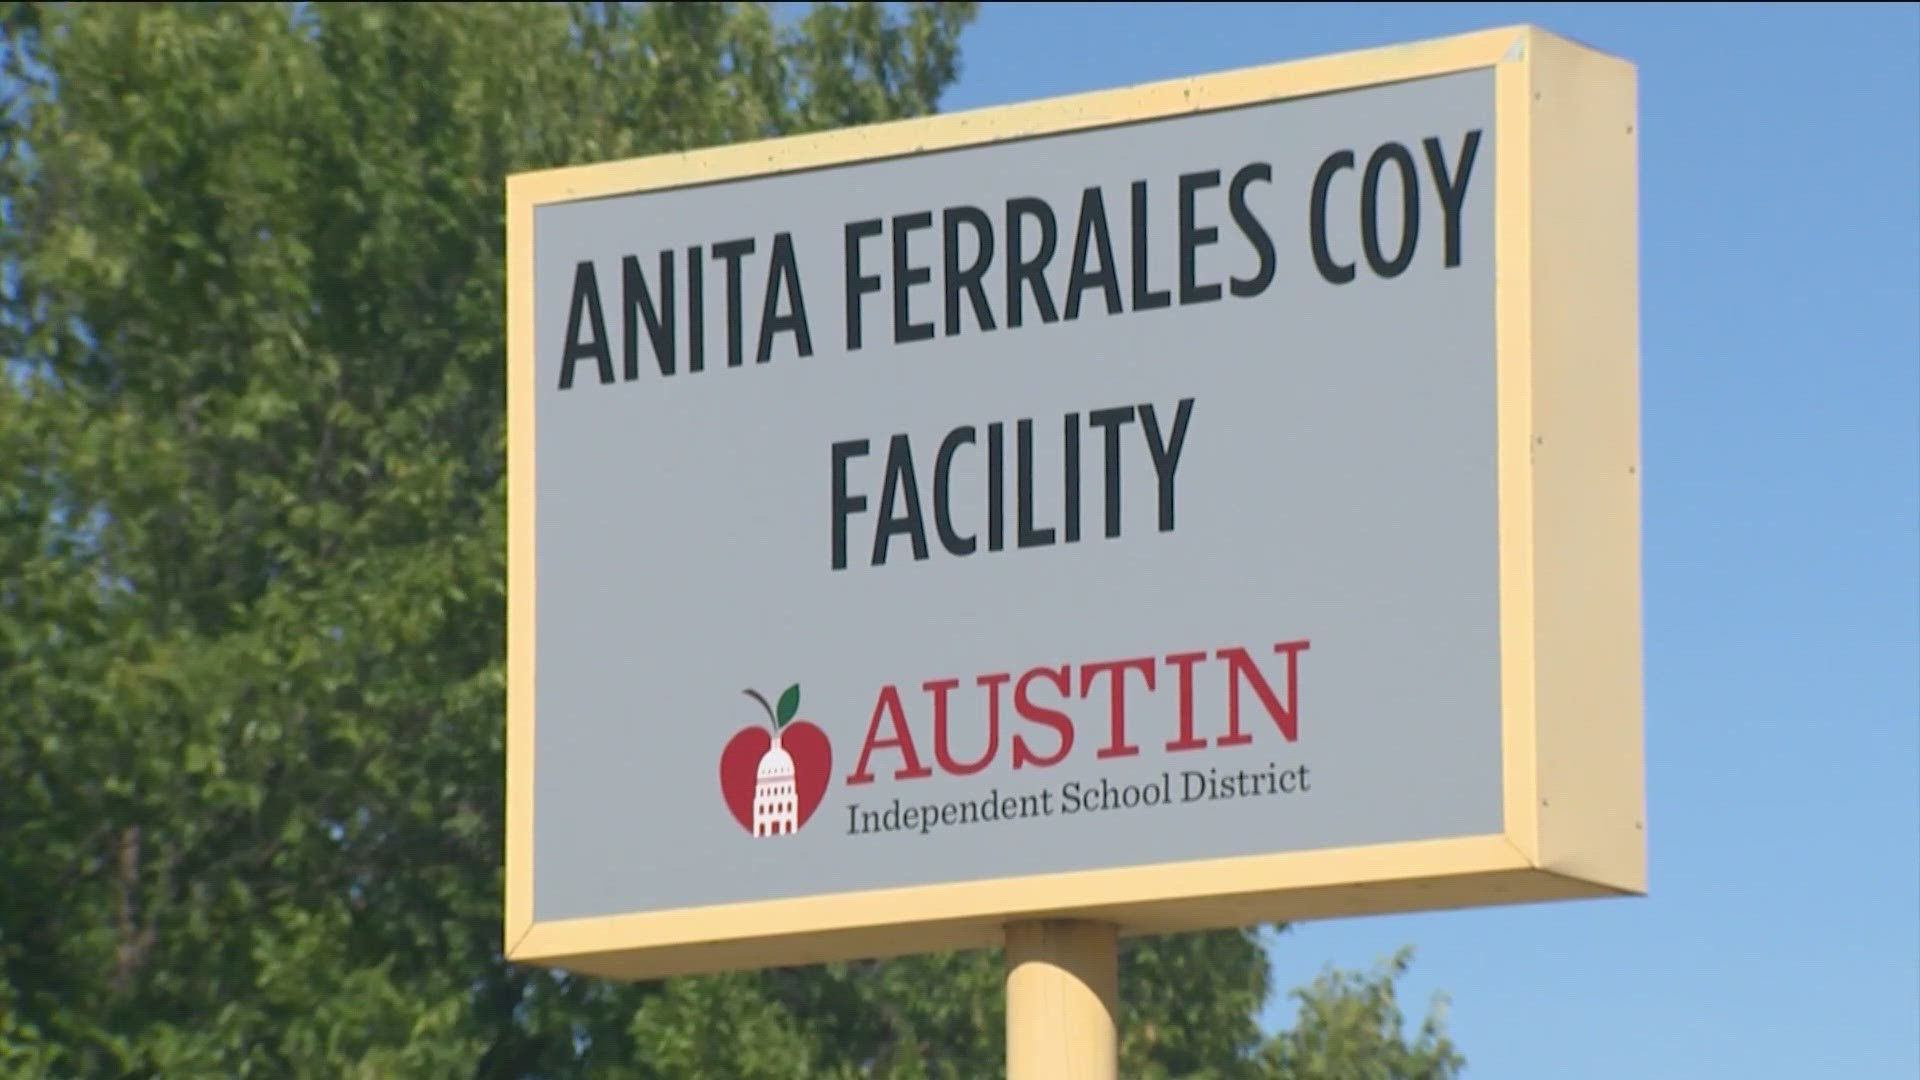 Austin ISD leaders are expecting construction of a 500-unit housing complex to begin within the next two years.